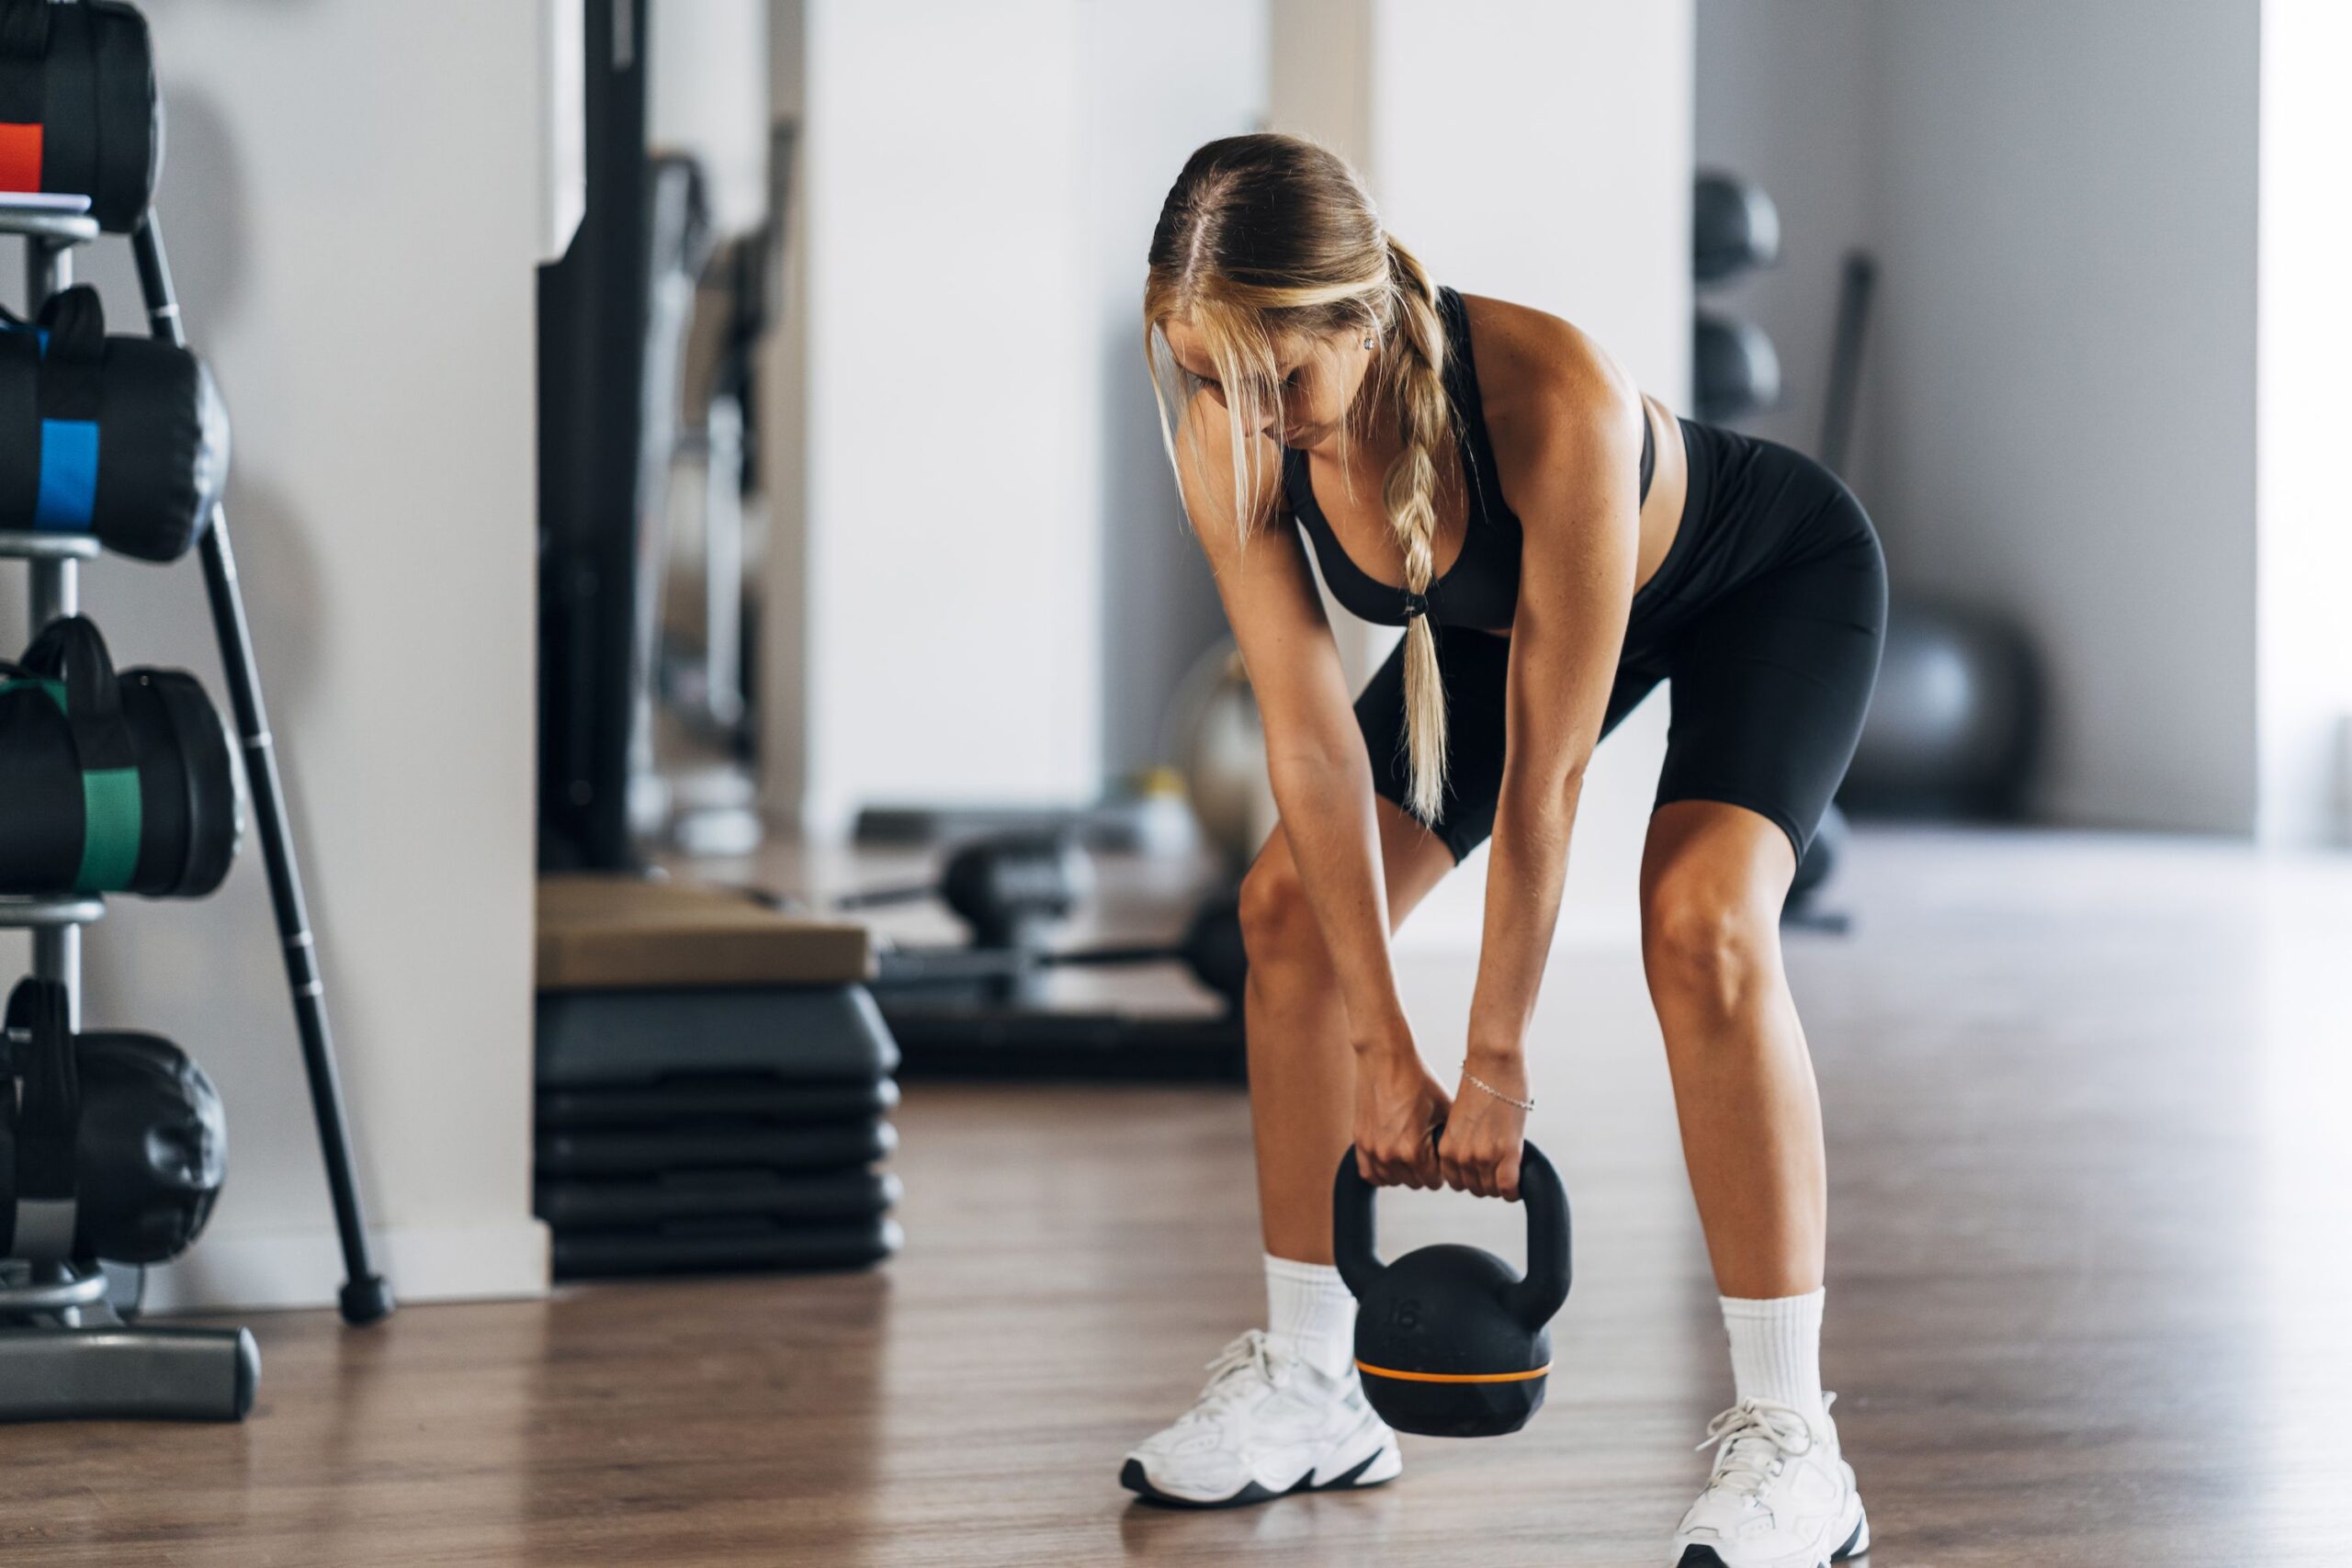 Full Body Workout: A Guide for Beginners